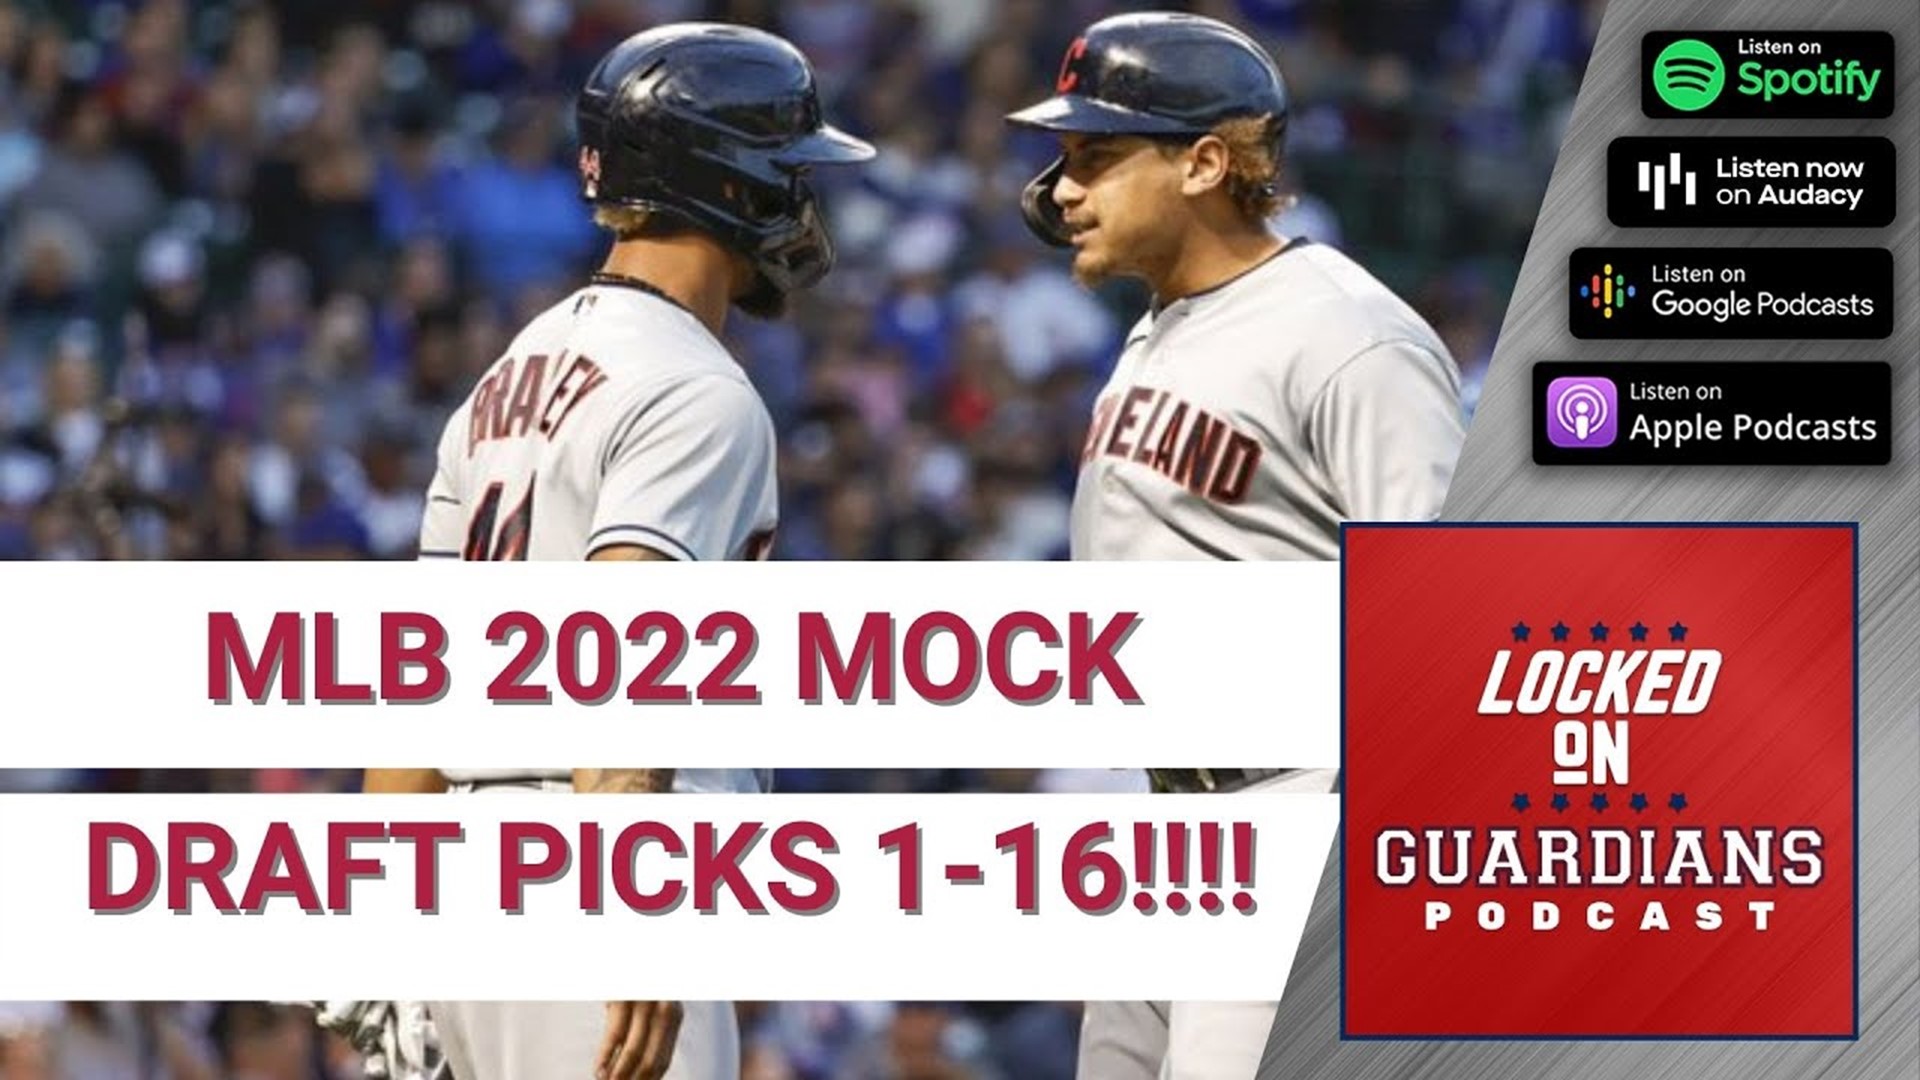 We’ve got a 16-pick mock draft for the 2022 MLB Draft that’s focused on previous history and data to try and determine what each team will decide.